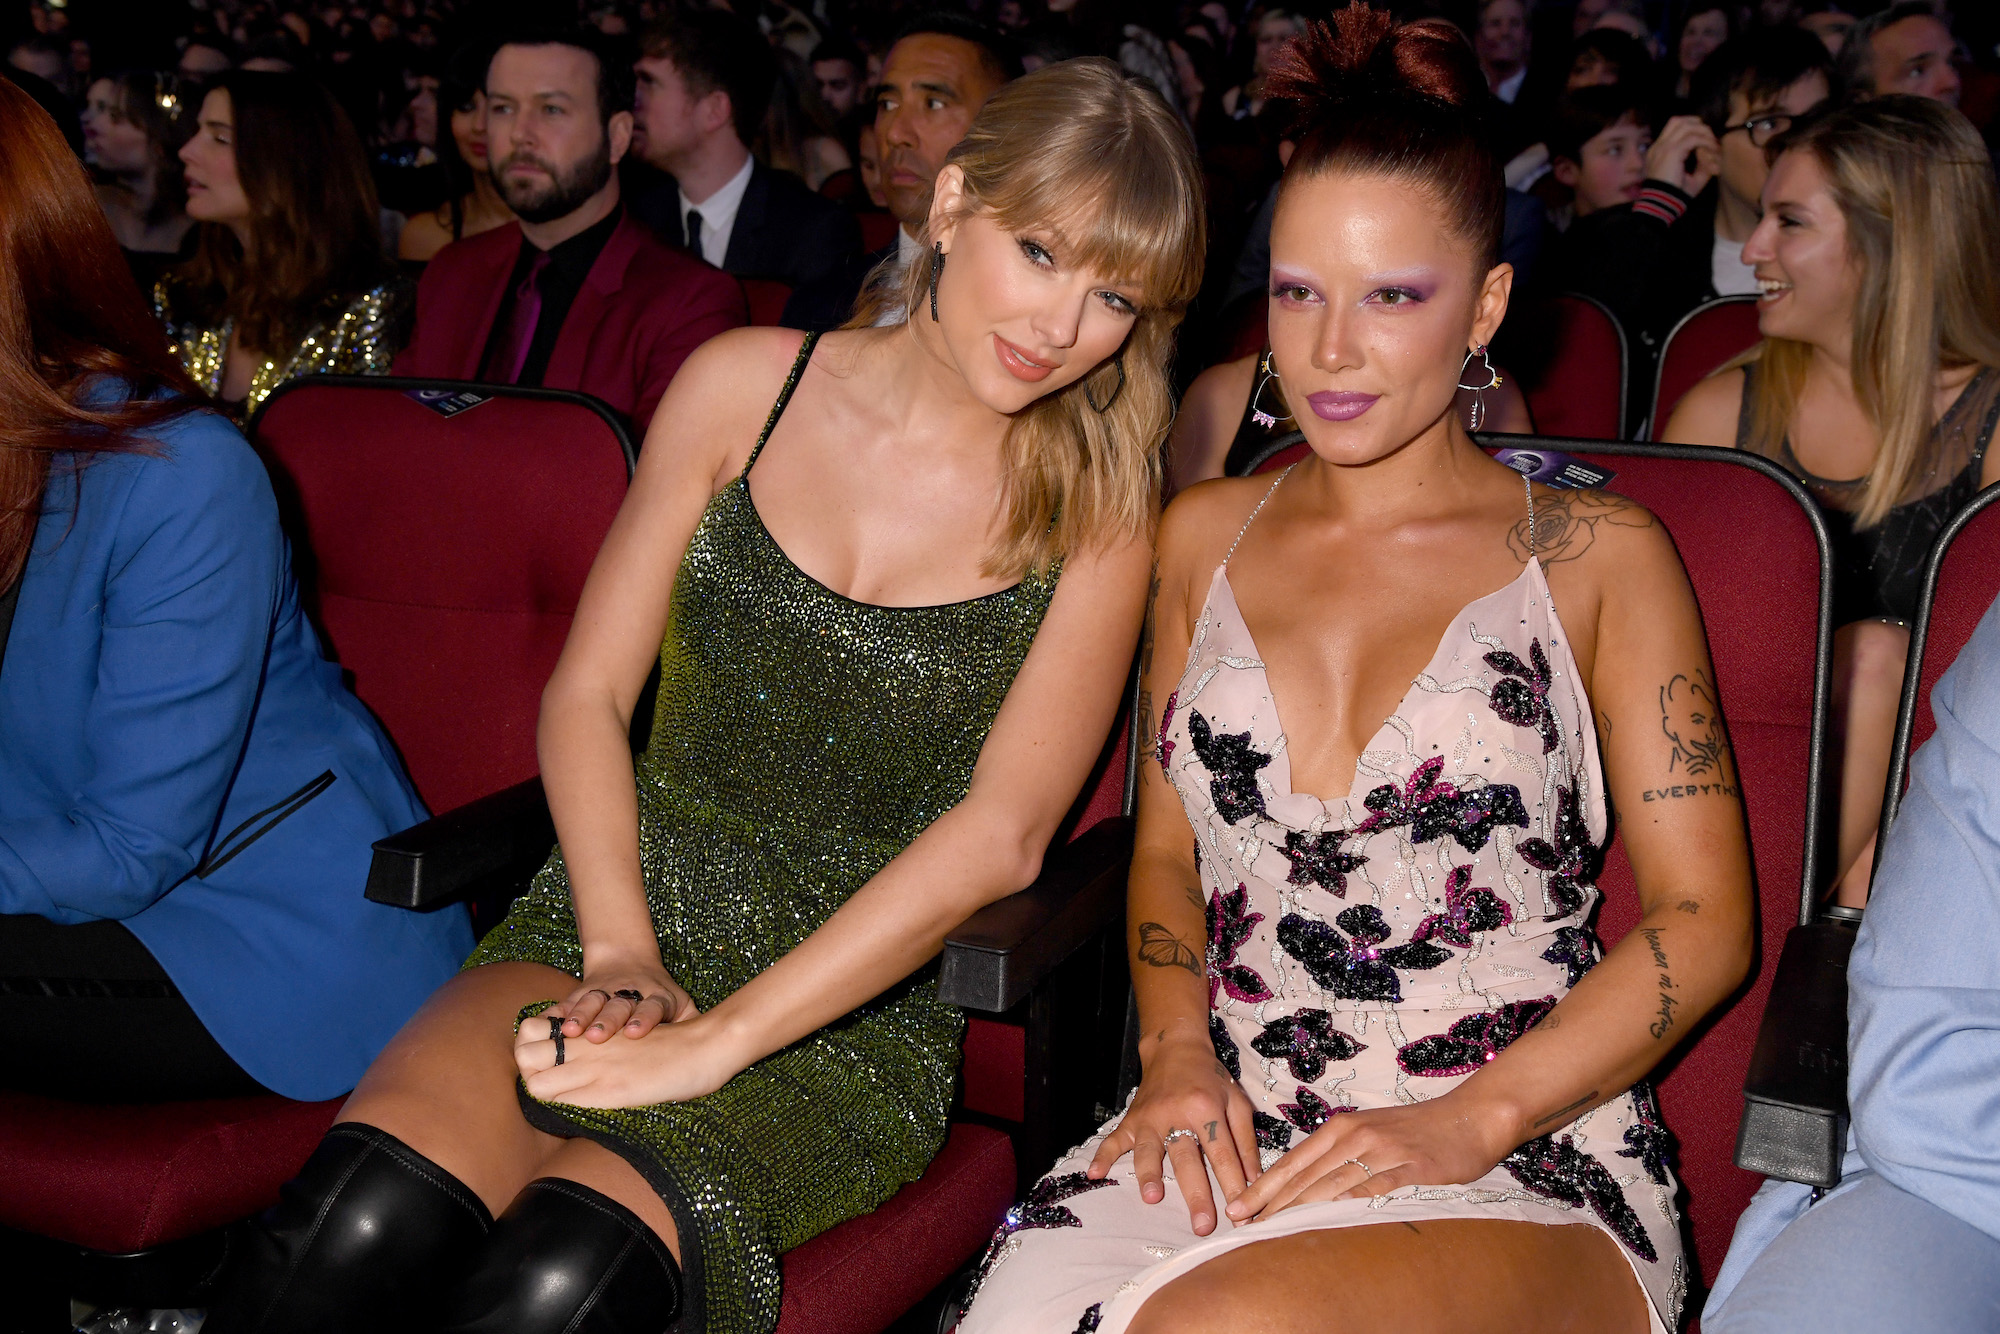 Taylor Swift and Halsey posing together at the 2019 American Music Awards